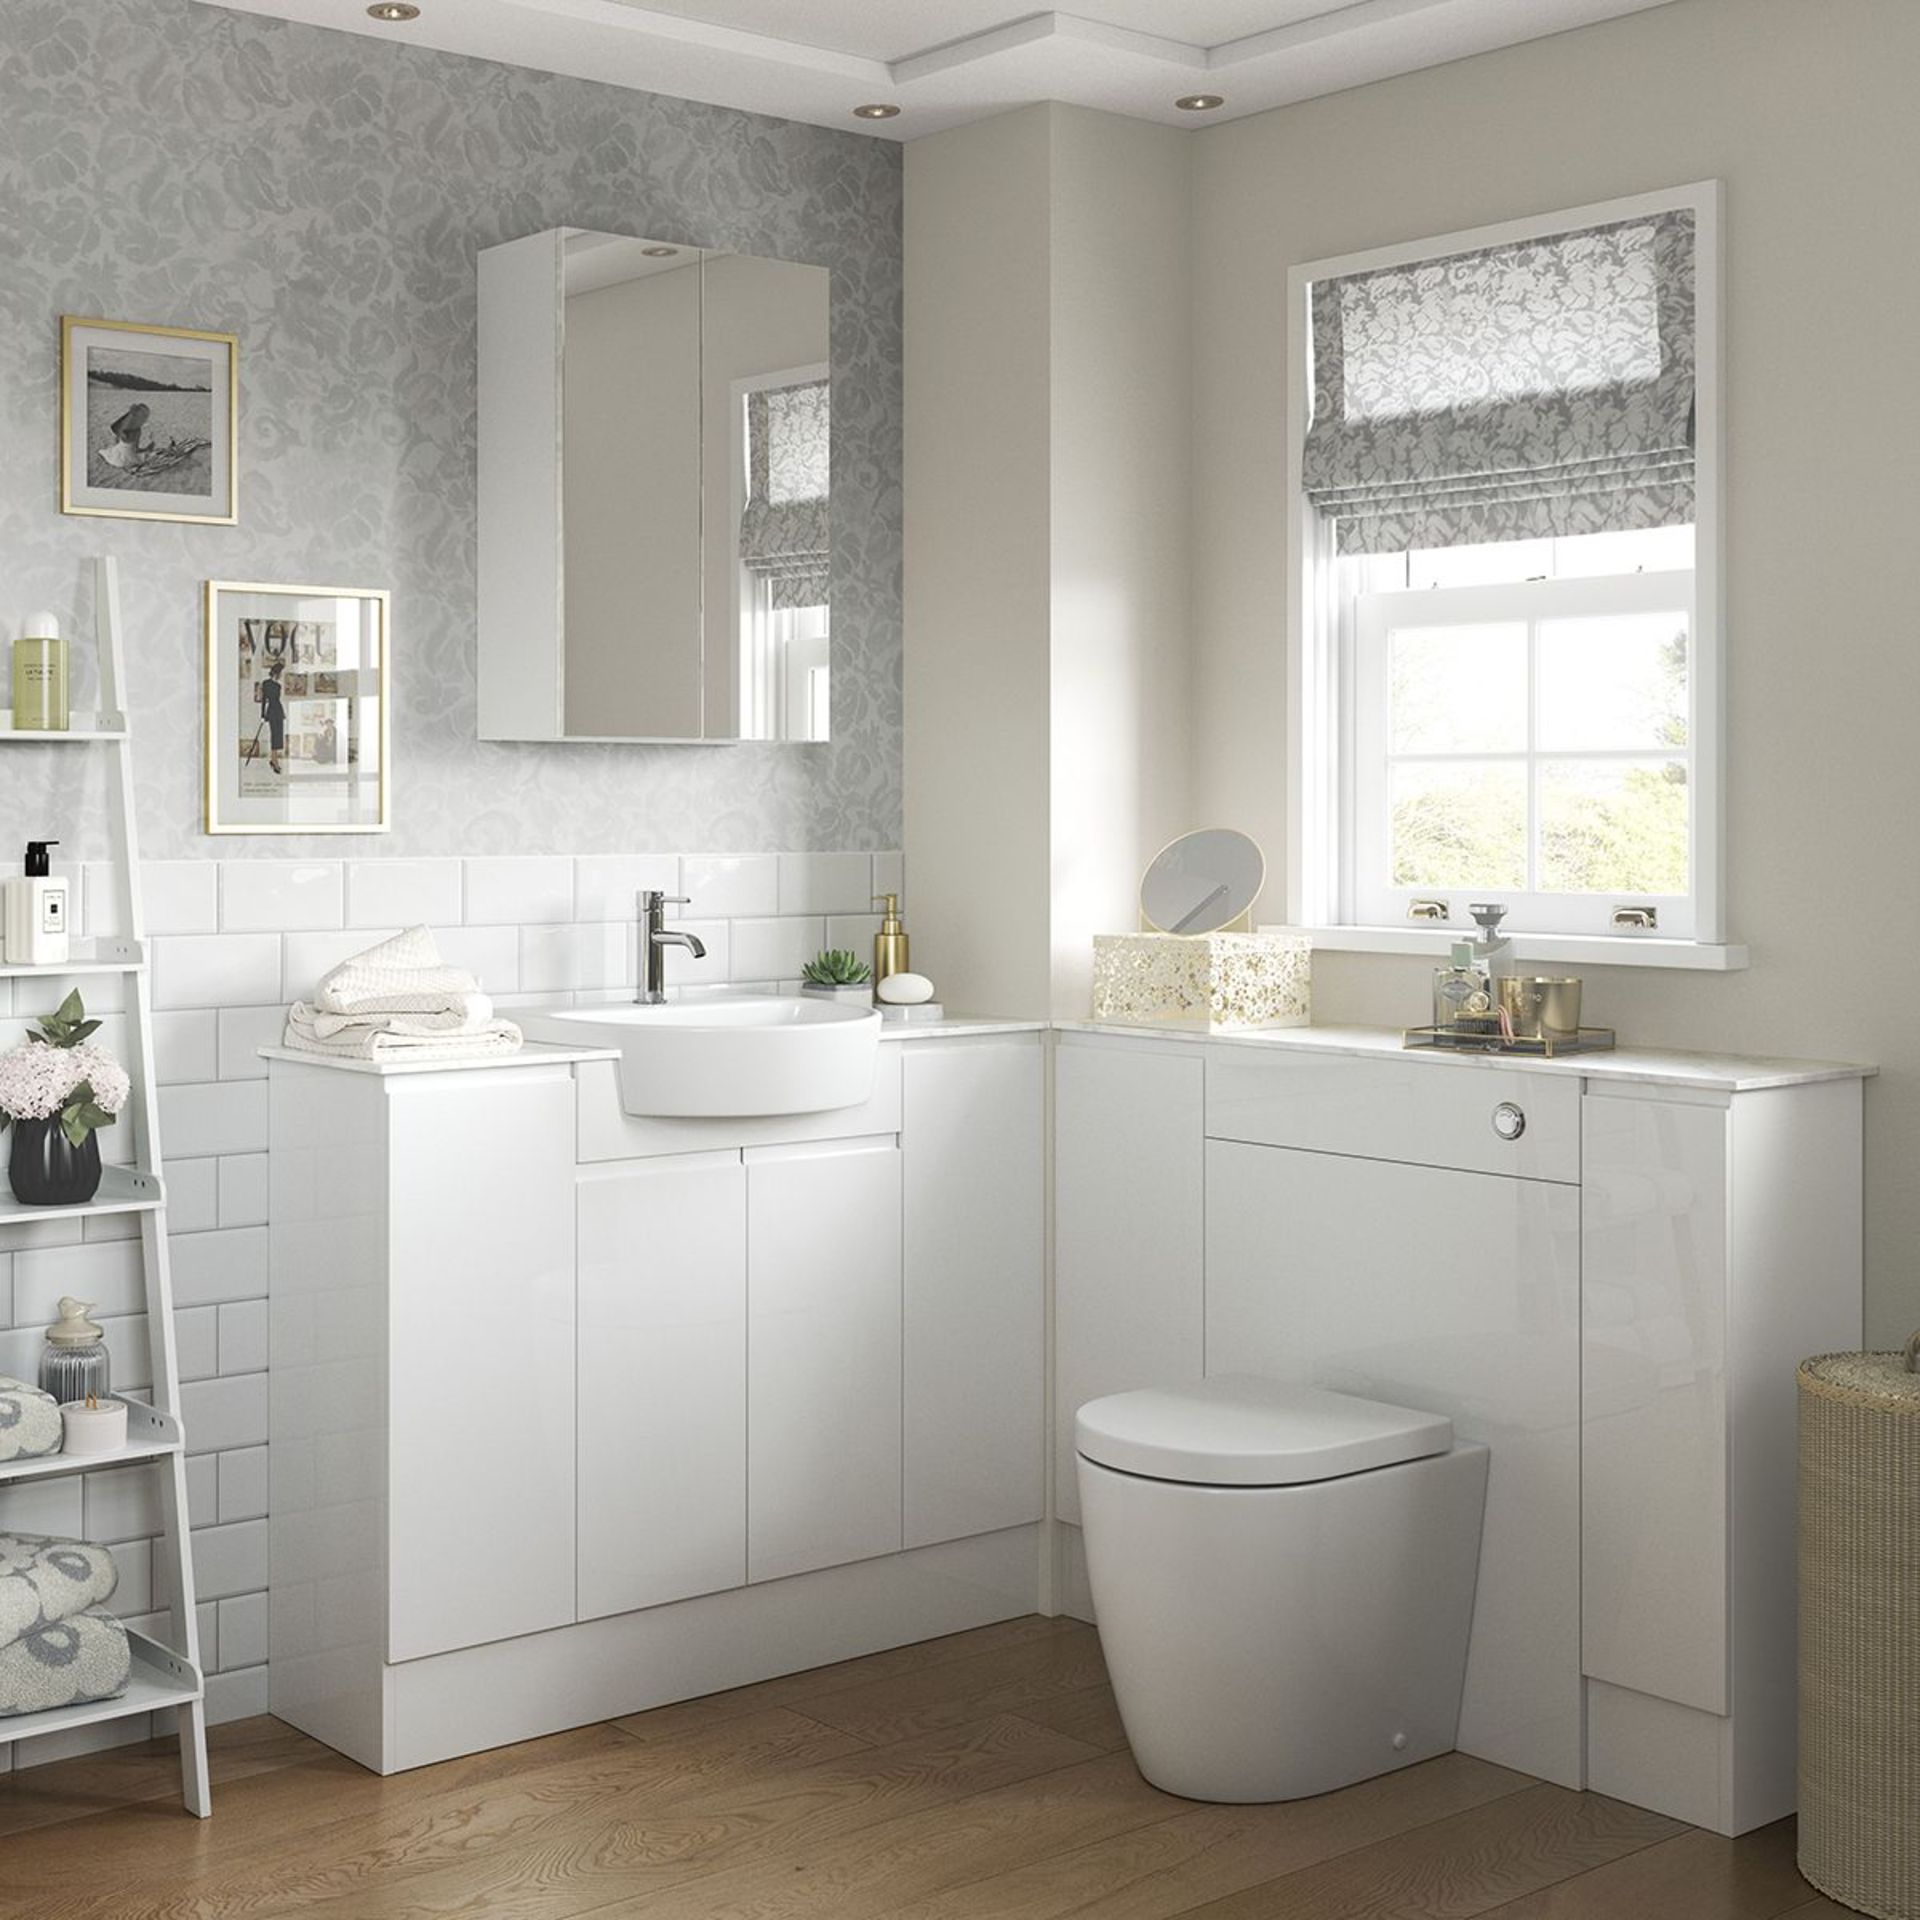 NEW (L101) Valesso White Gloss Vanity Unit 600mm. RRP £305.00. Finished in White Gloss Adju... - Image 3 of 3